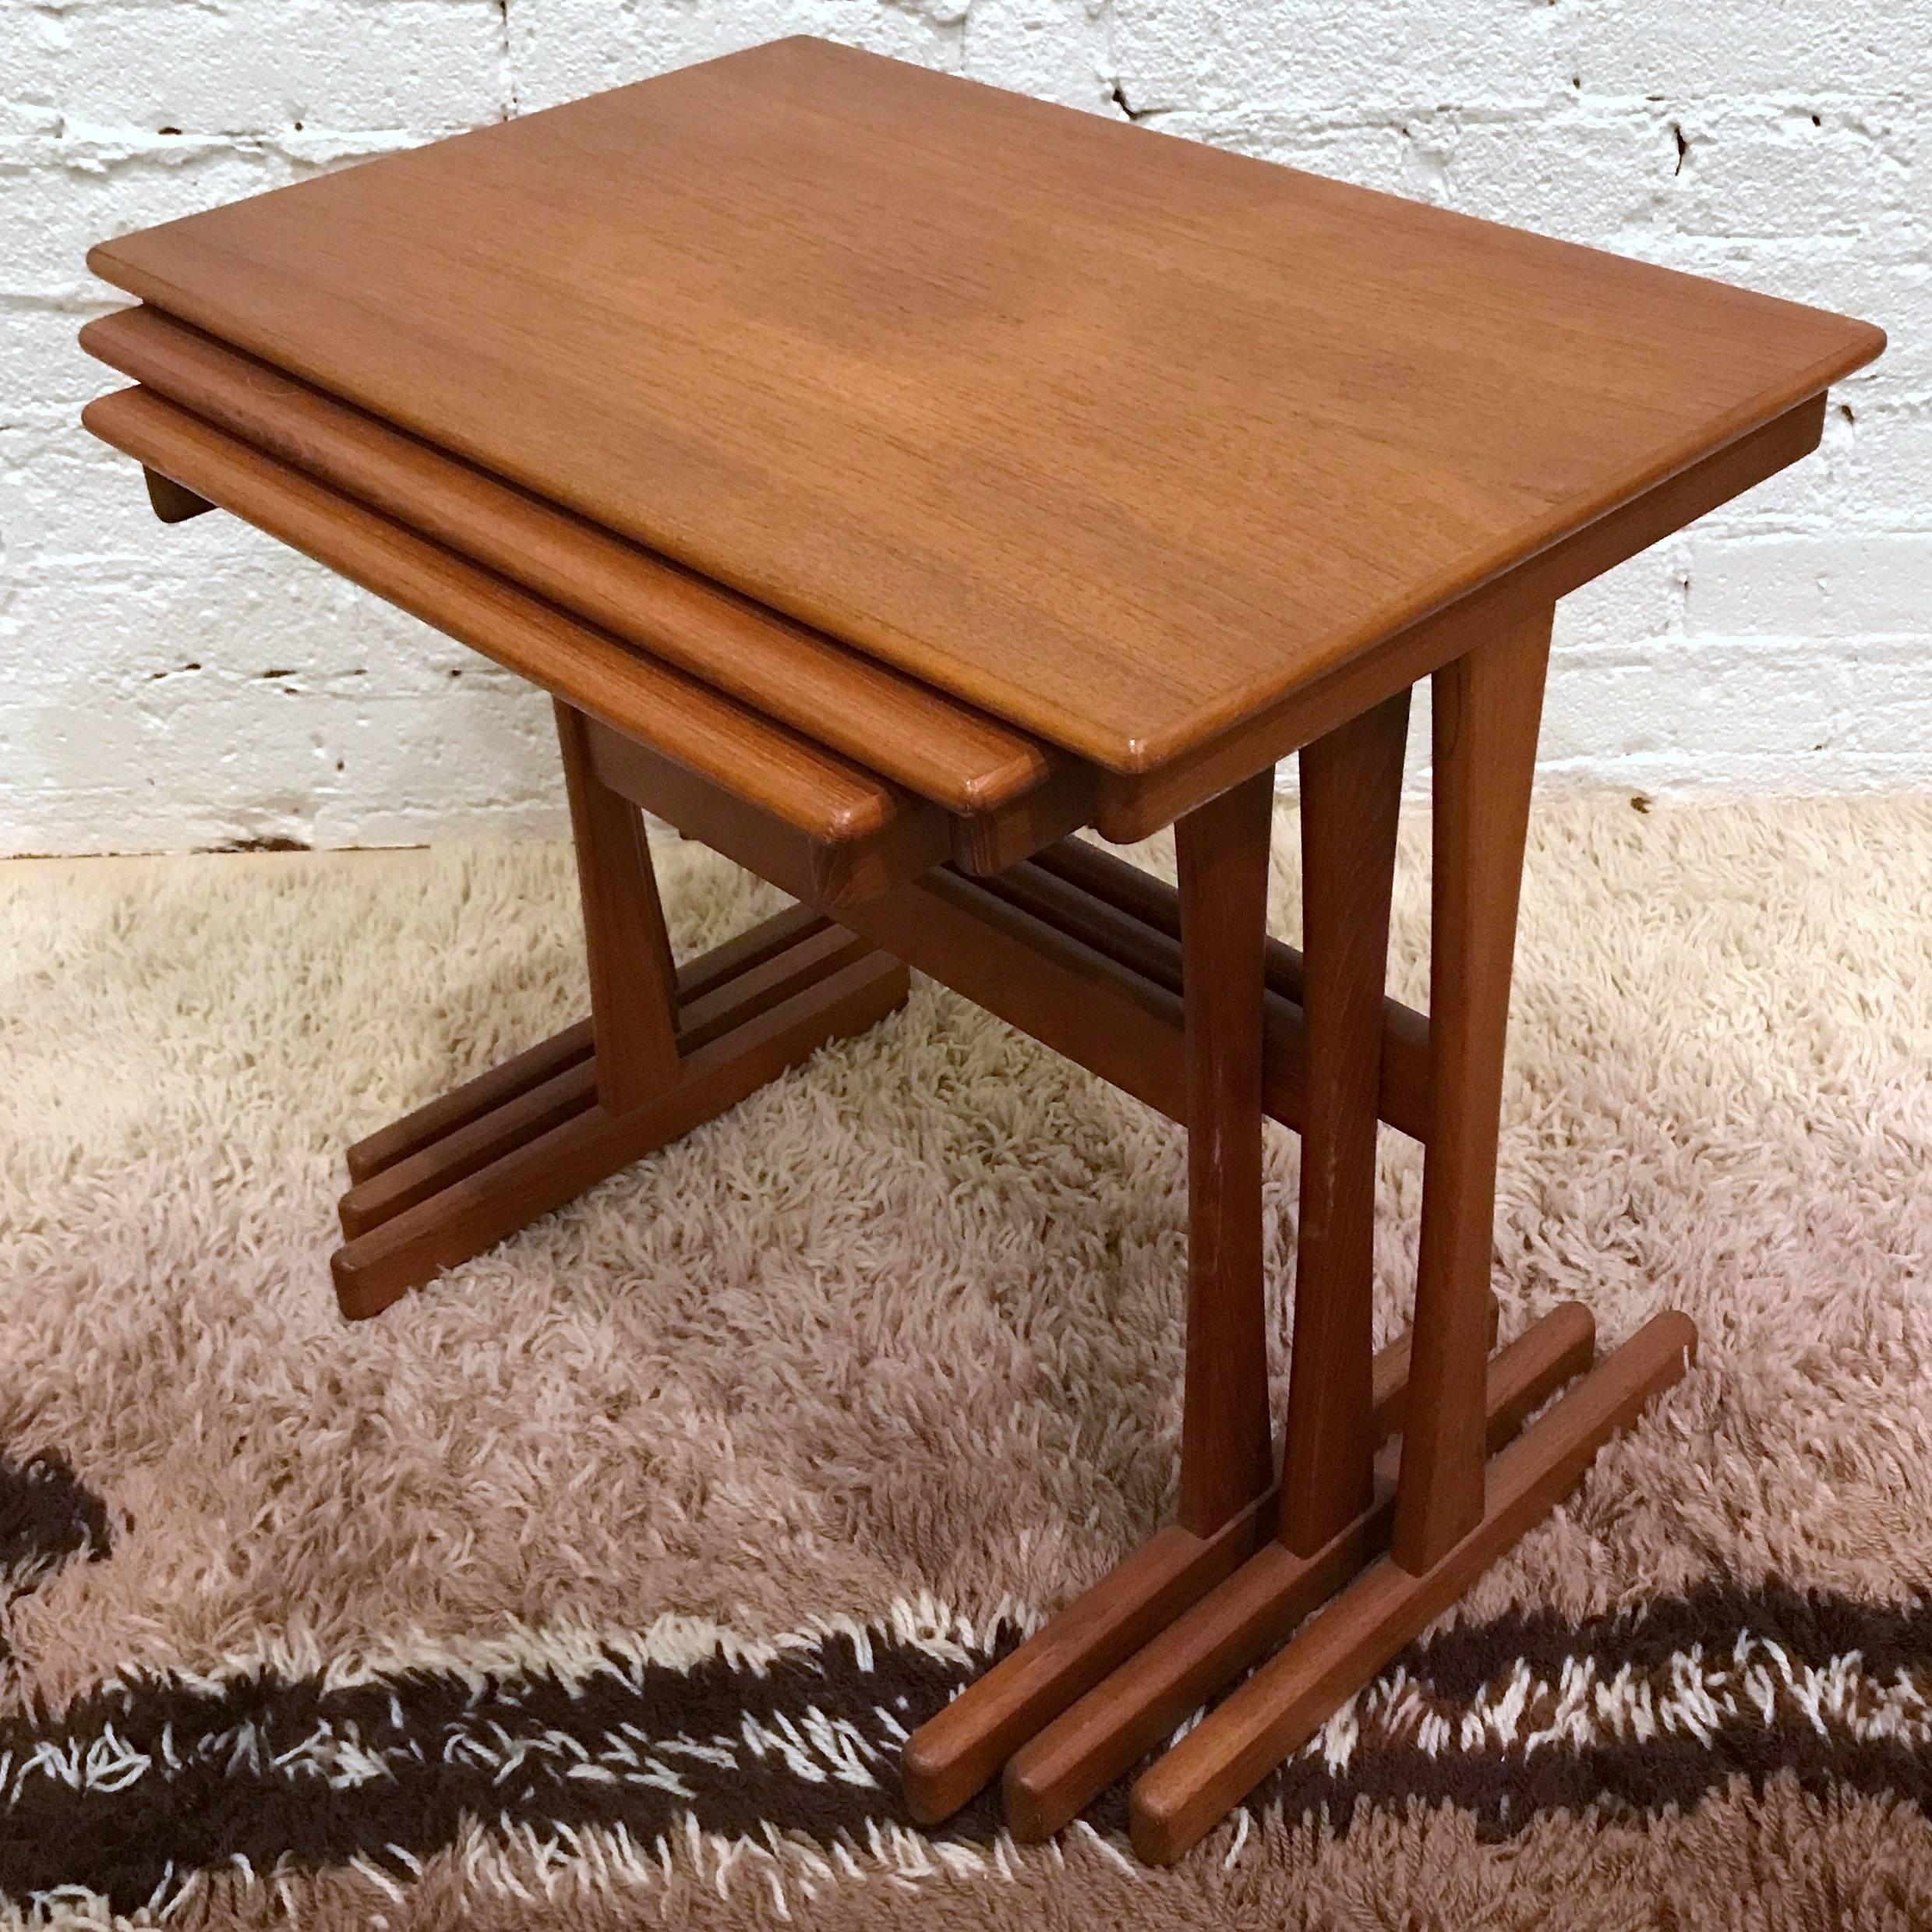 Set of three 1960s Danish modern teak nesting tables designed by Arne Wahl Iversen. The smaller tables slide into grooves in the larger tables, allowing the set to be moved as one unit. 

When nested together, the set measures 21.5